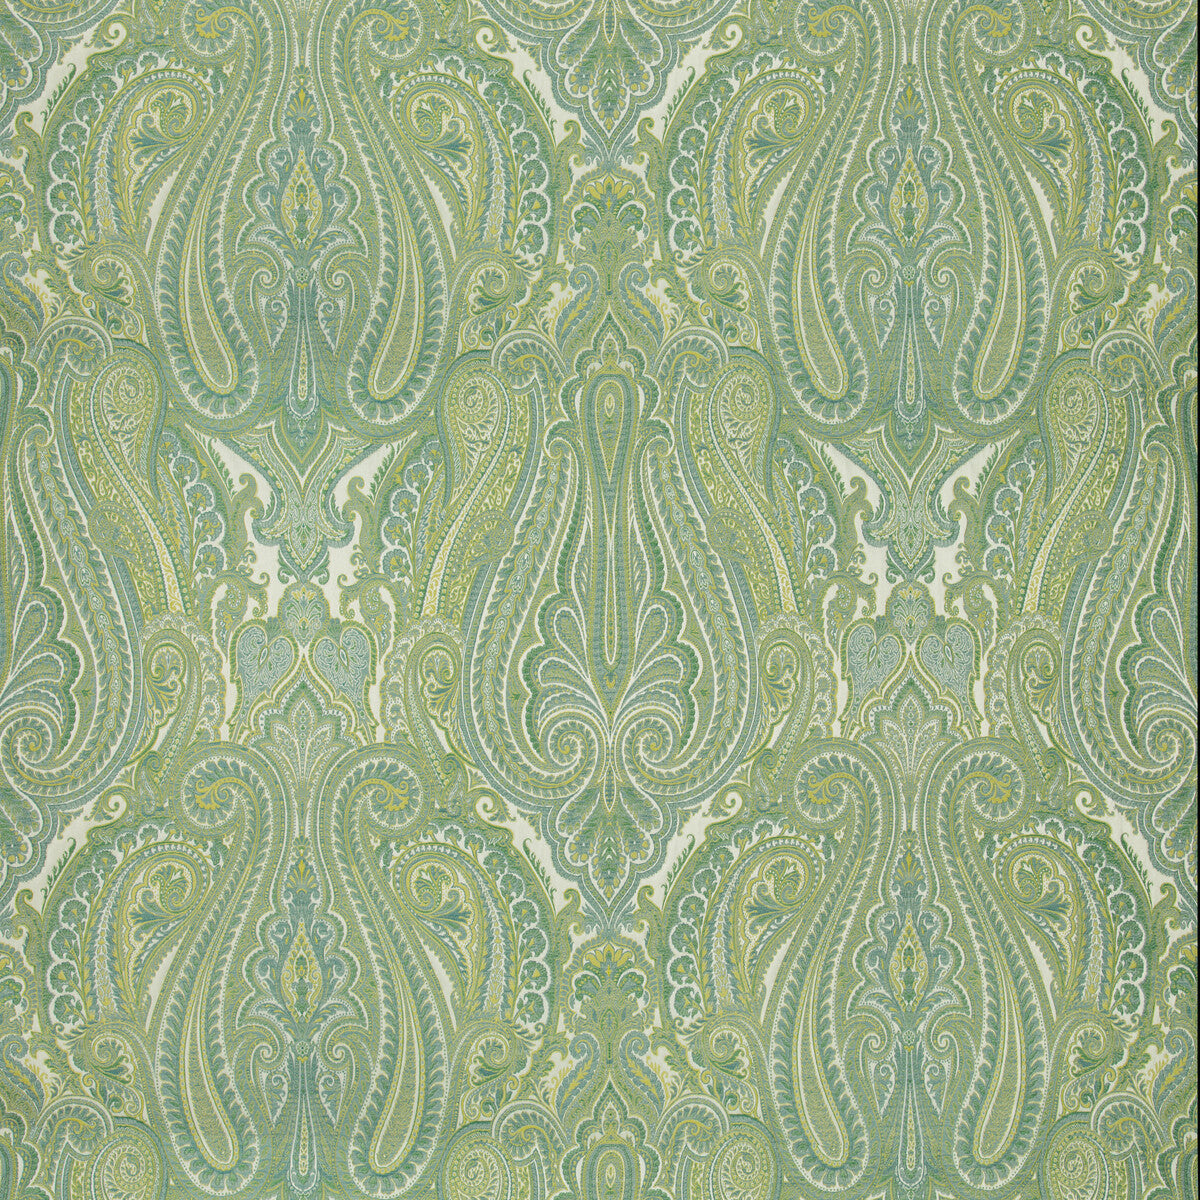 Aoria Paisley fabric in aqua/green color - pattern 8018113.133.0 - by Brunschwig &amp; Fils in the Baret collection